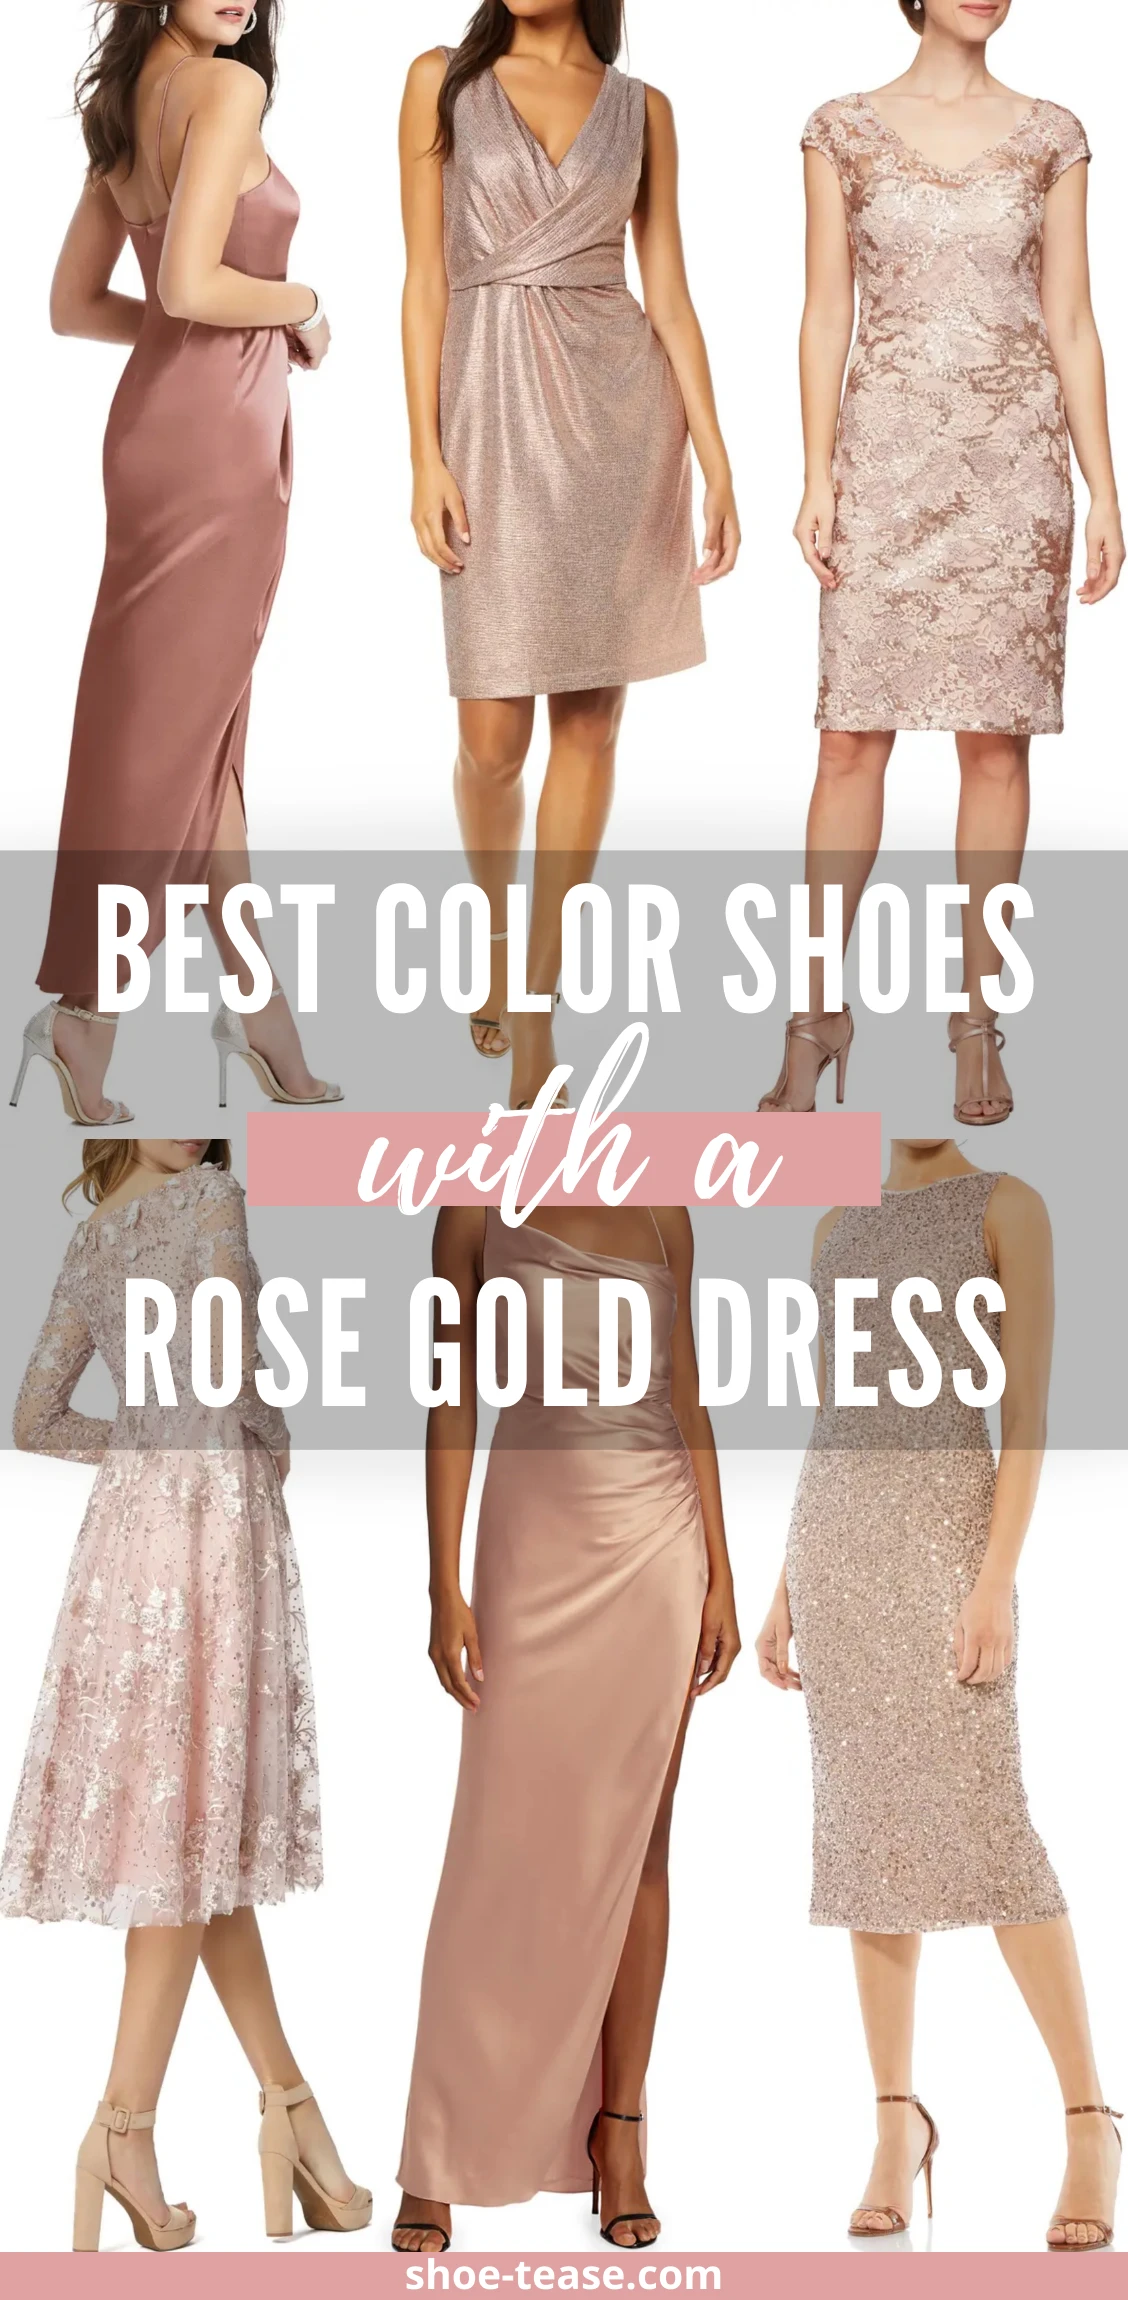 6 women wearing different color shoes with rose gold dress outfits.